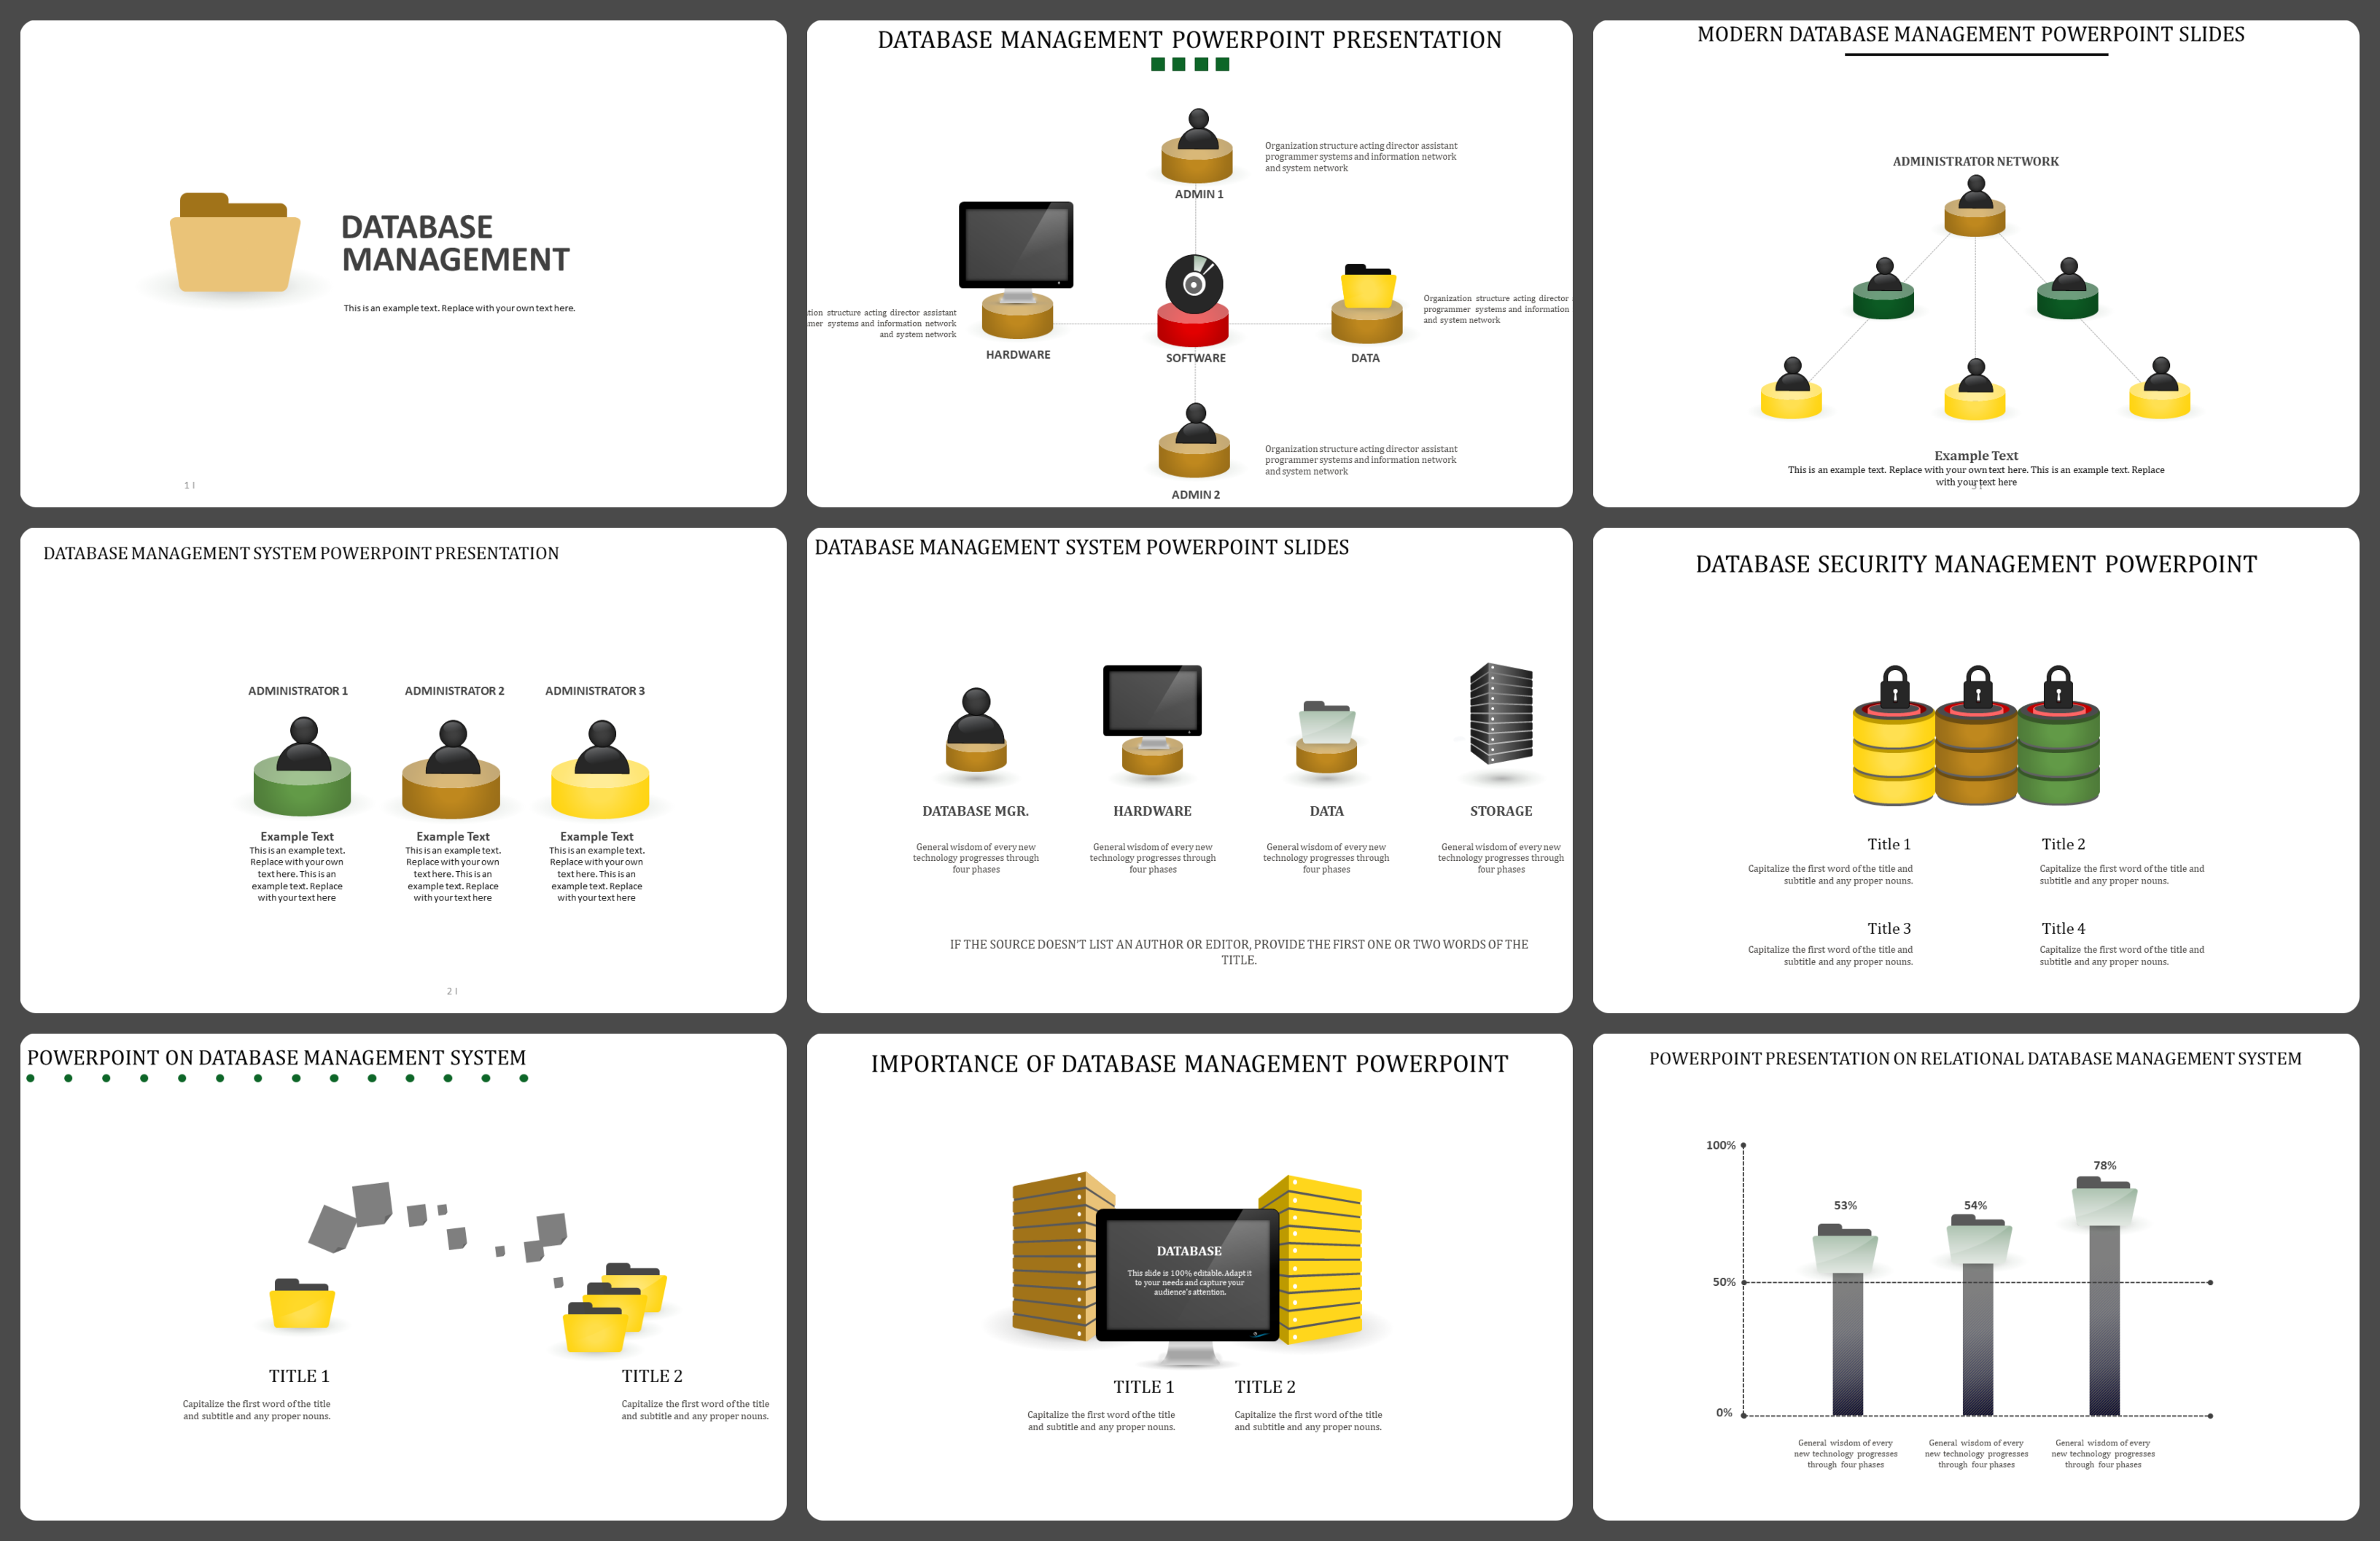 Database Management System PowerPoint Presentation Template